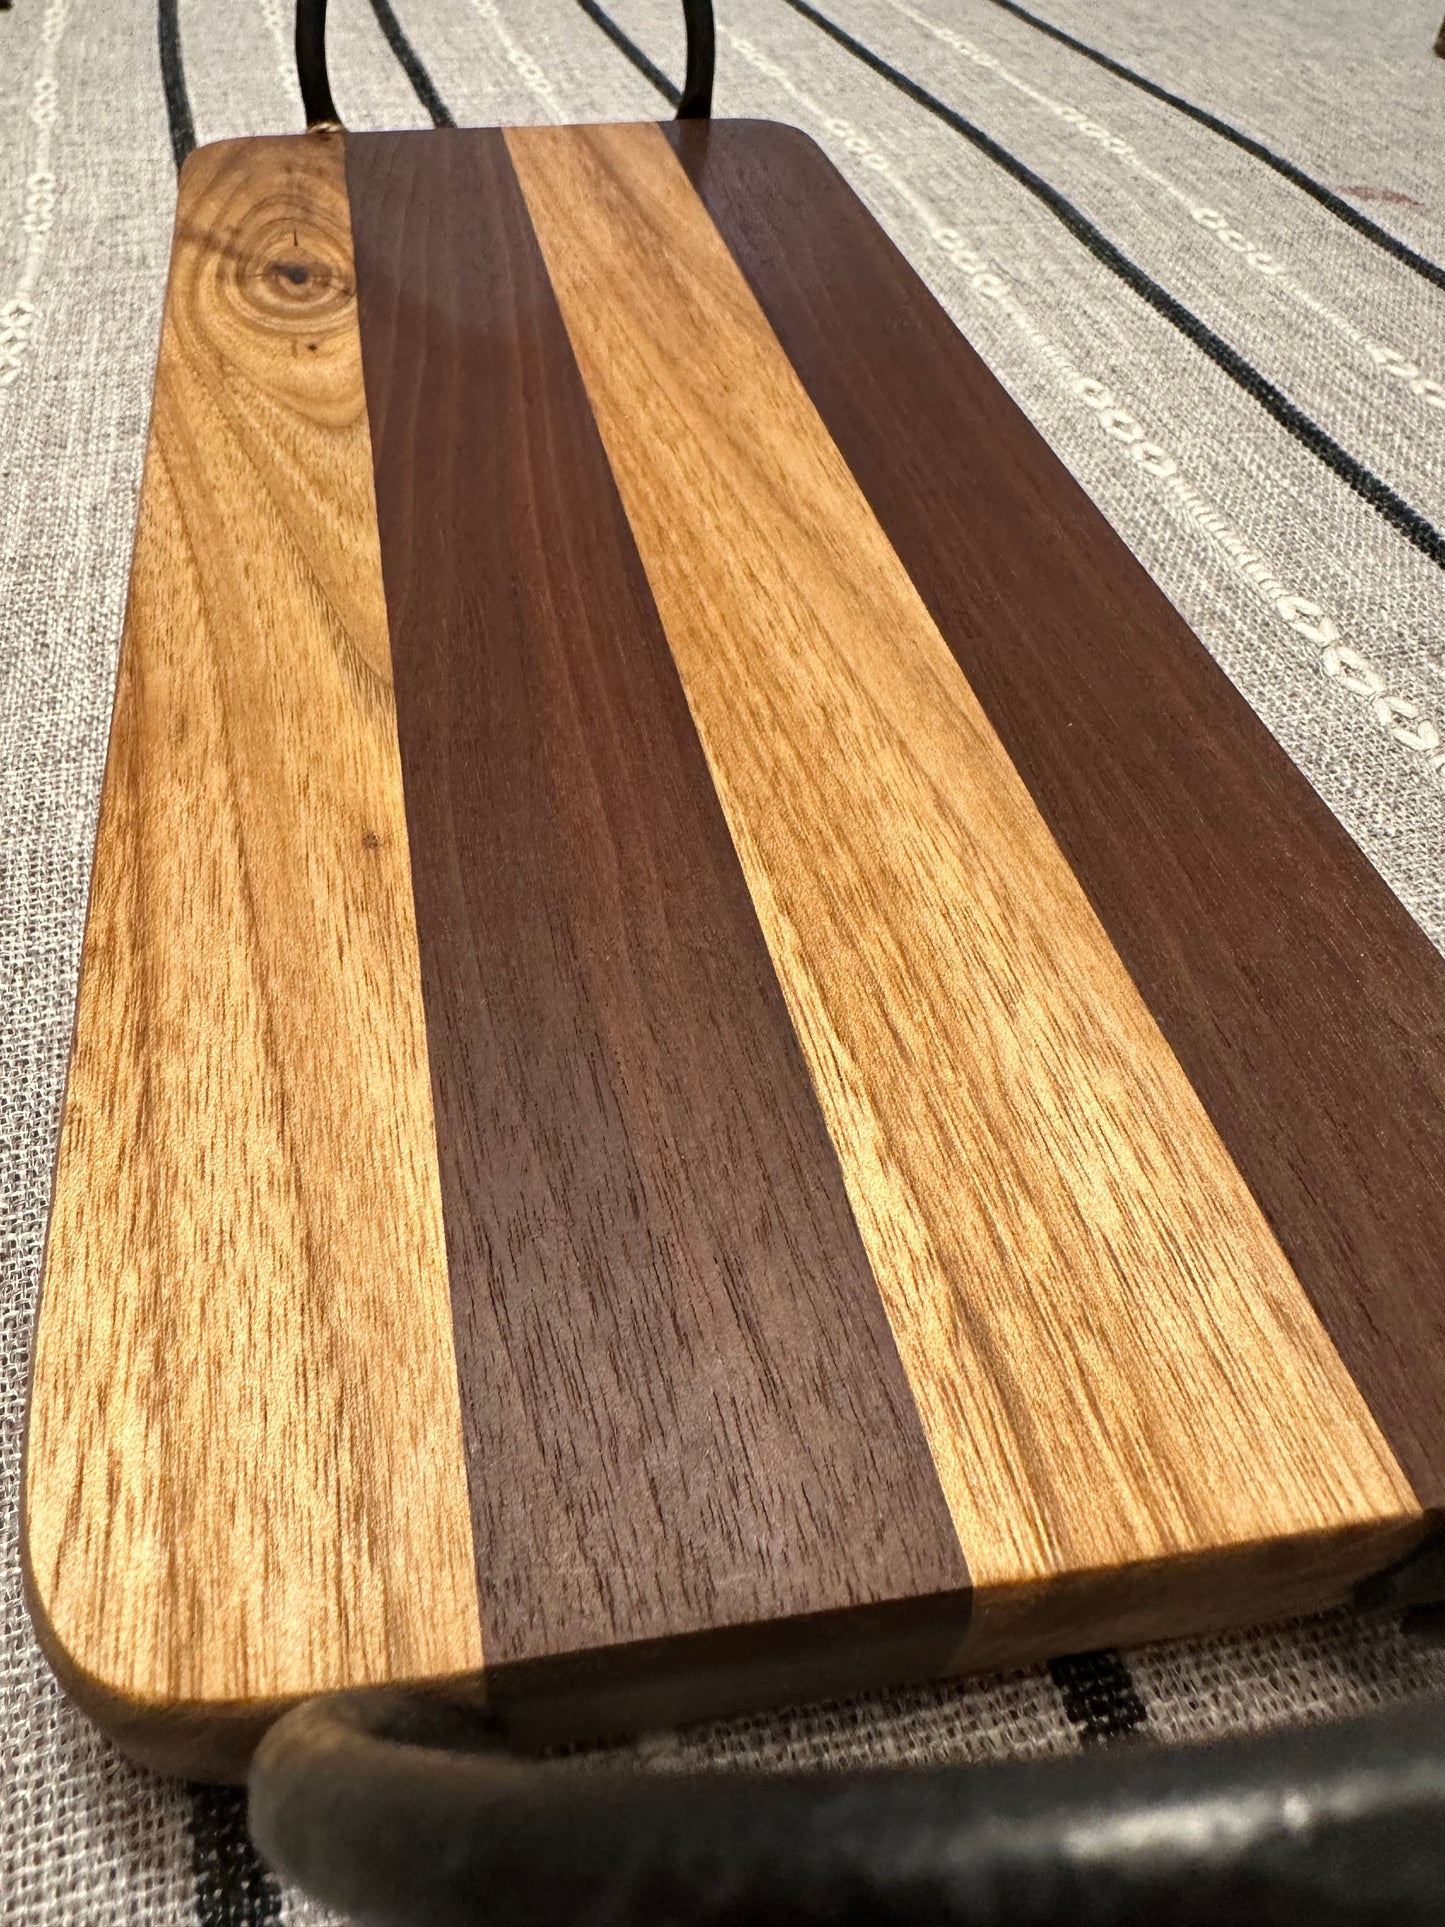 Walnut and butternut tray with handles